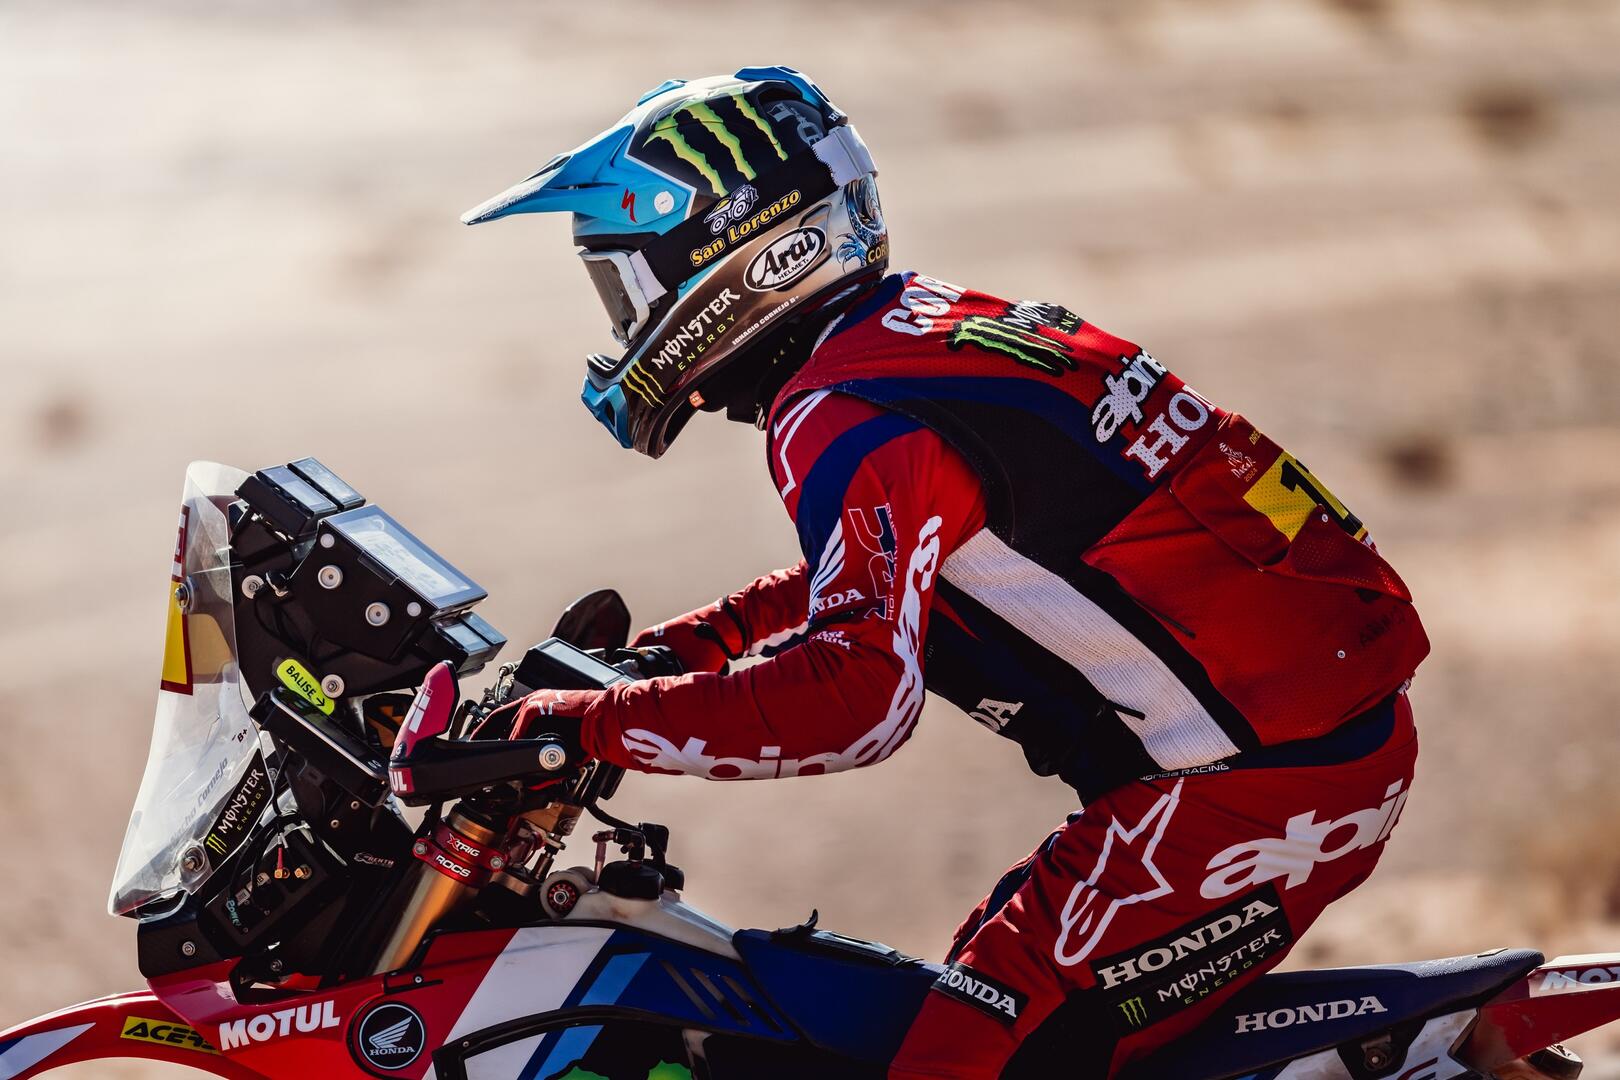 The Monster Energy Honda Team soak up the pressure with a stunning second consecutive one-two-three stage finish